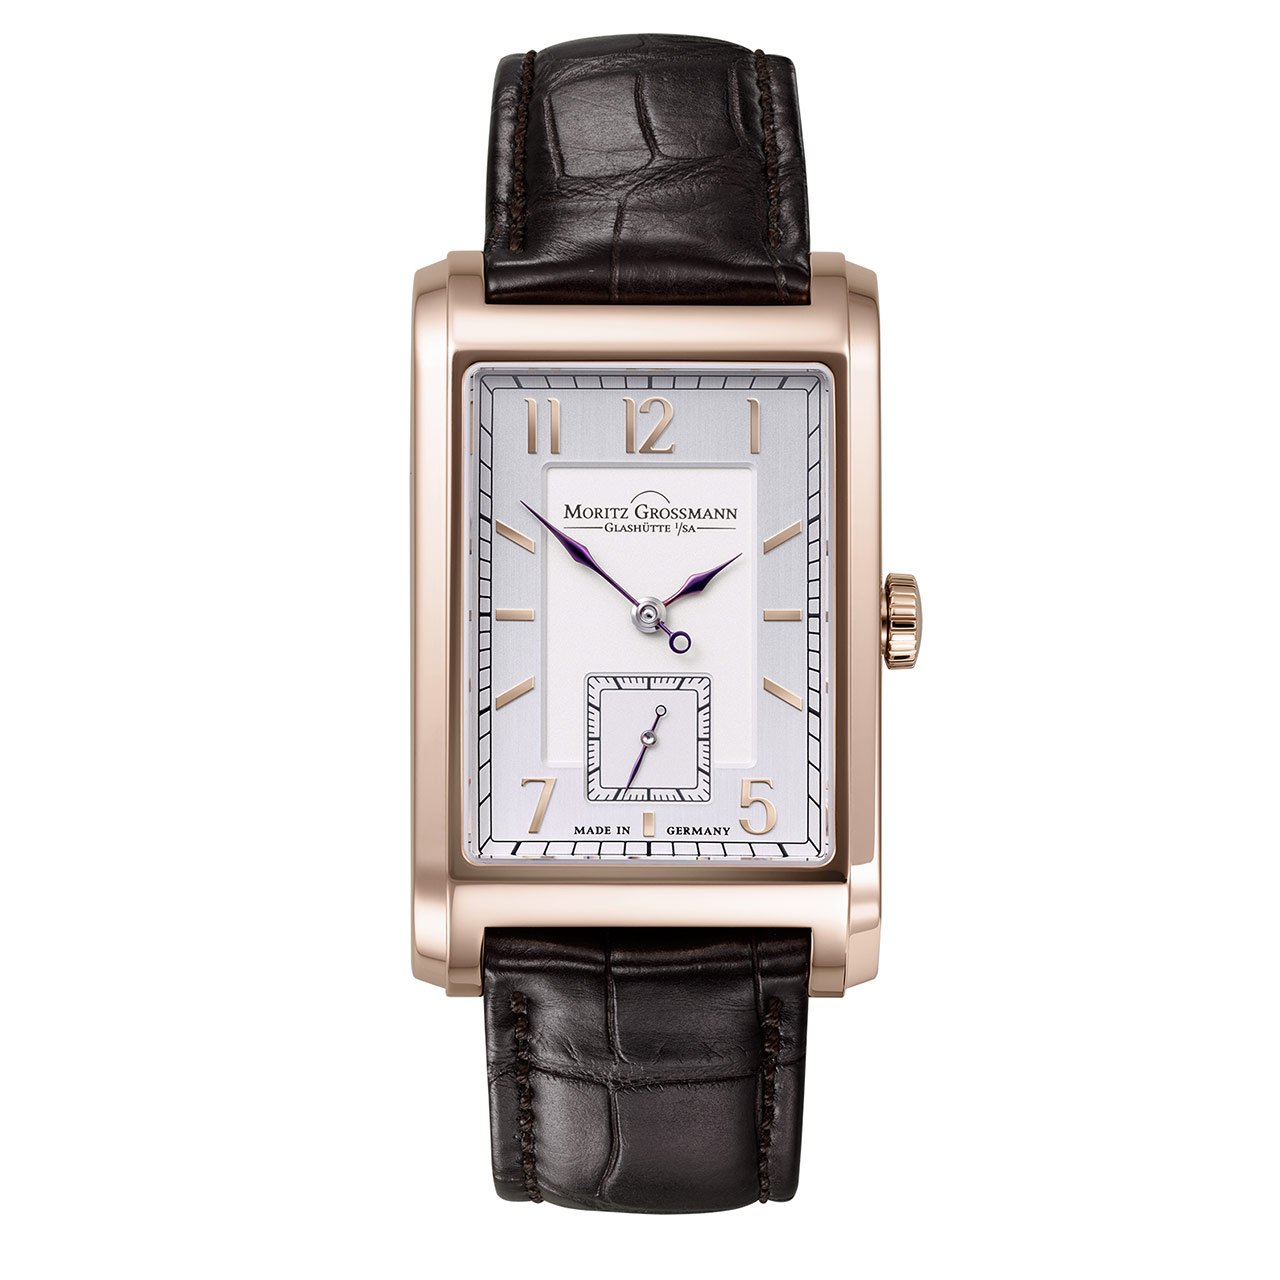 Moritz Grossmann - Corner Stone Collection | Time and Watches | The ...